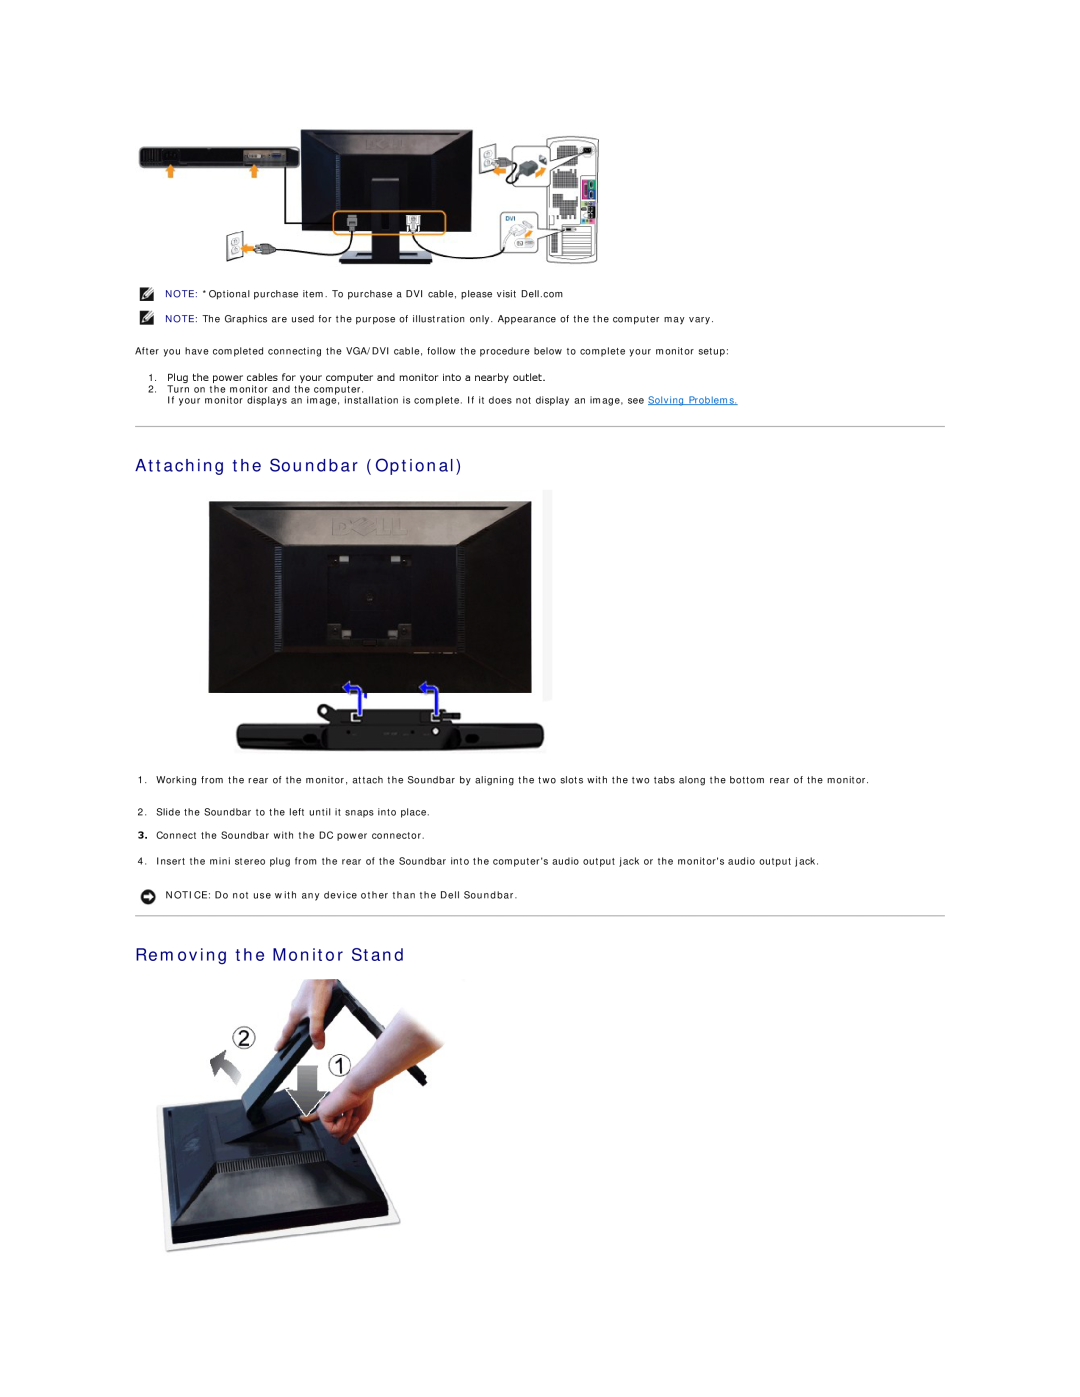 Dell IN2020MF, IN2020F appendix Attaching the Soundbar Optional, Removing the Monitor Stand 